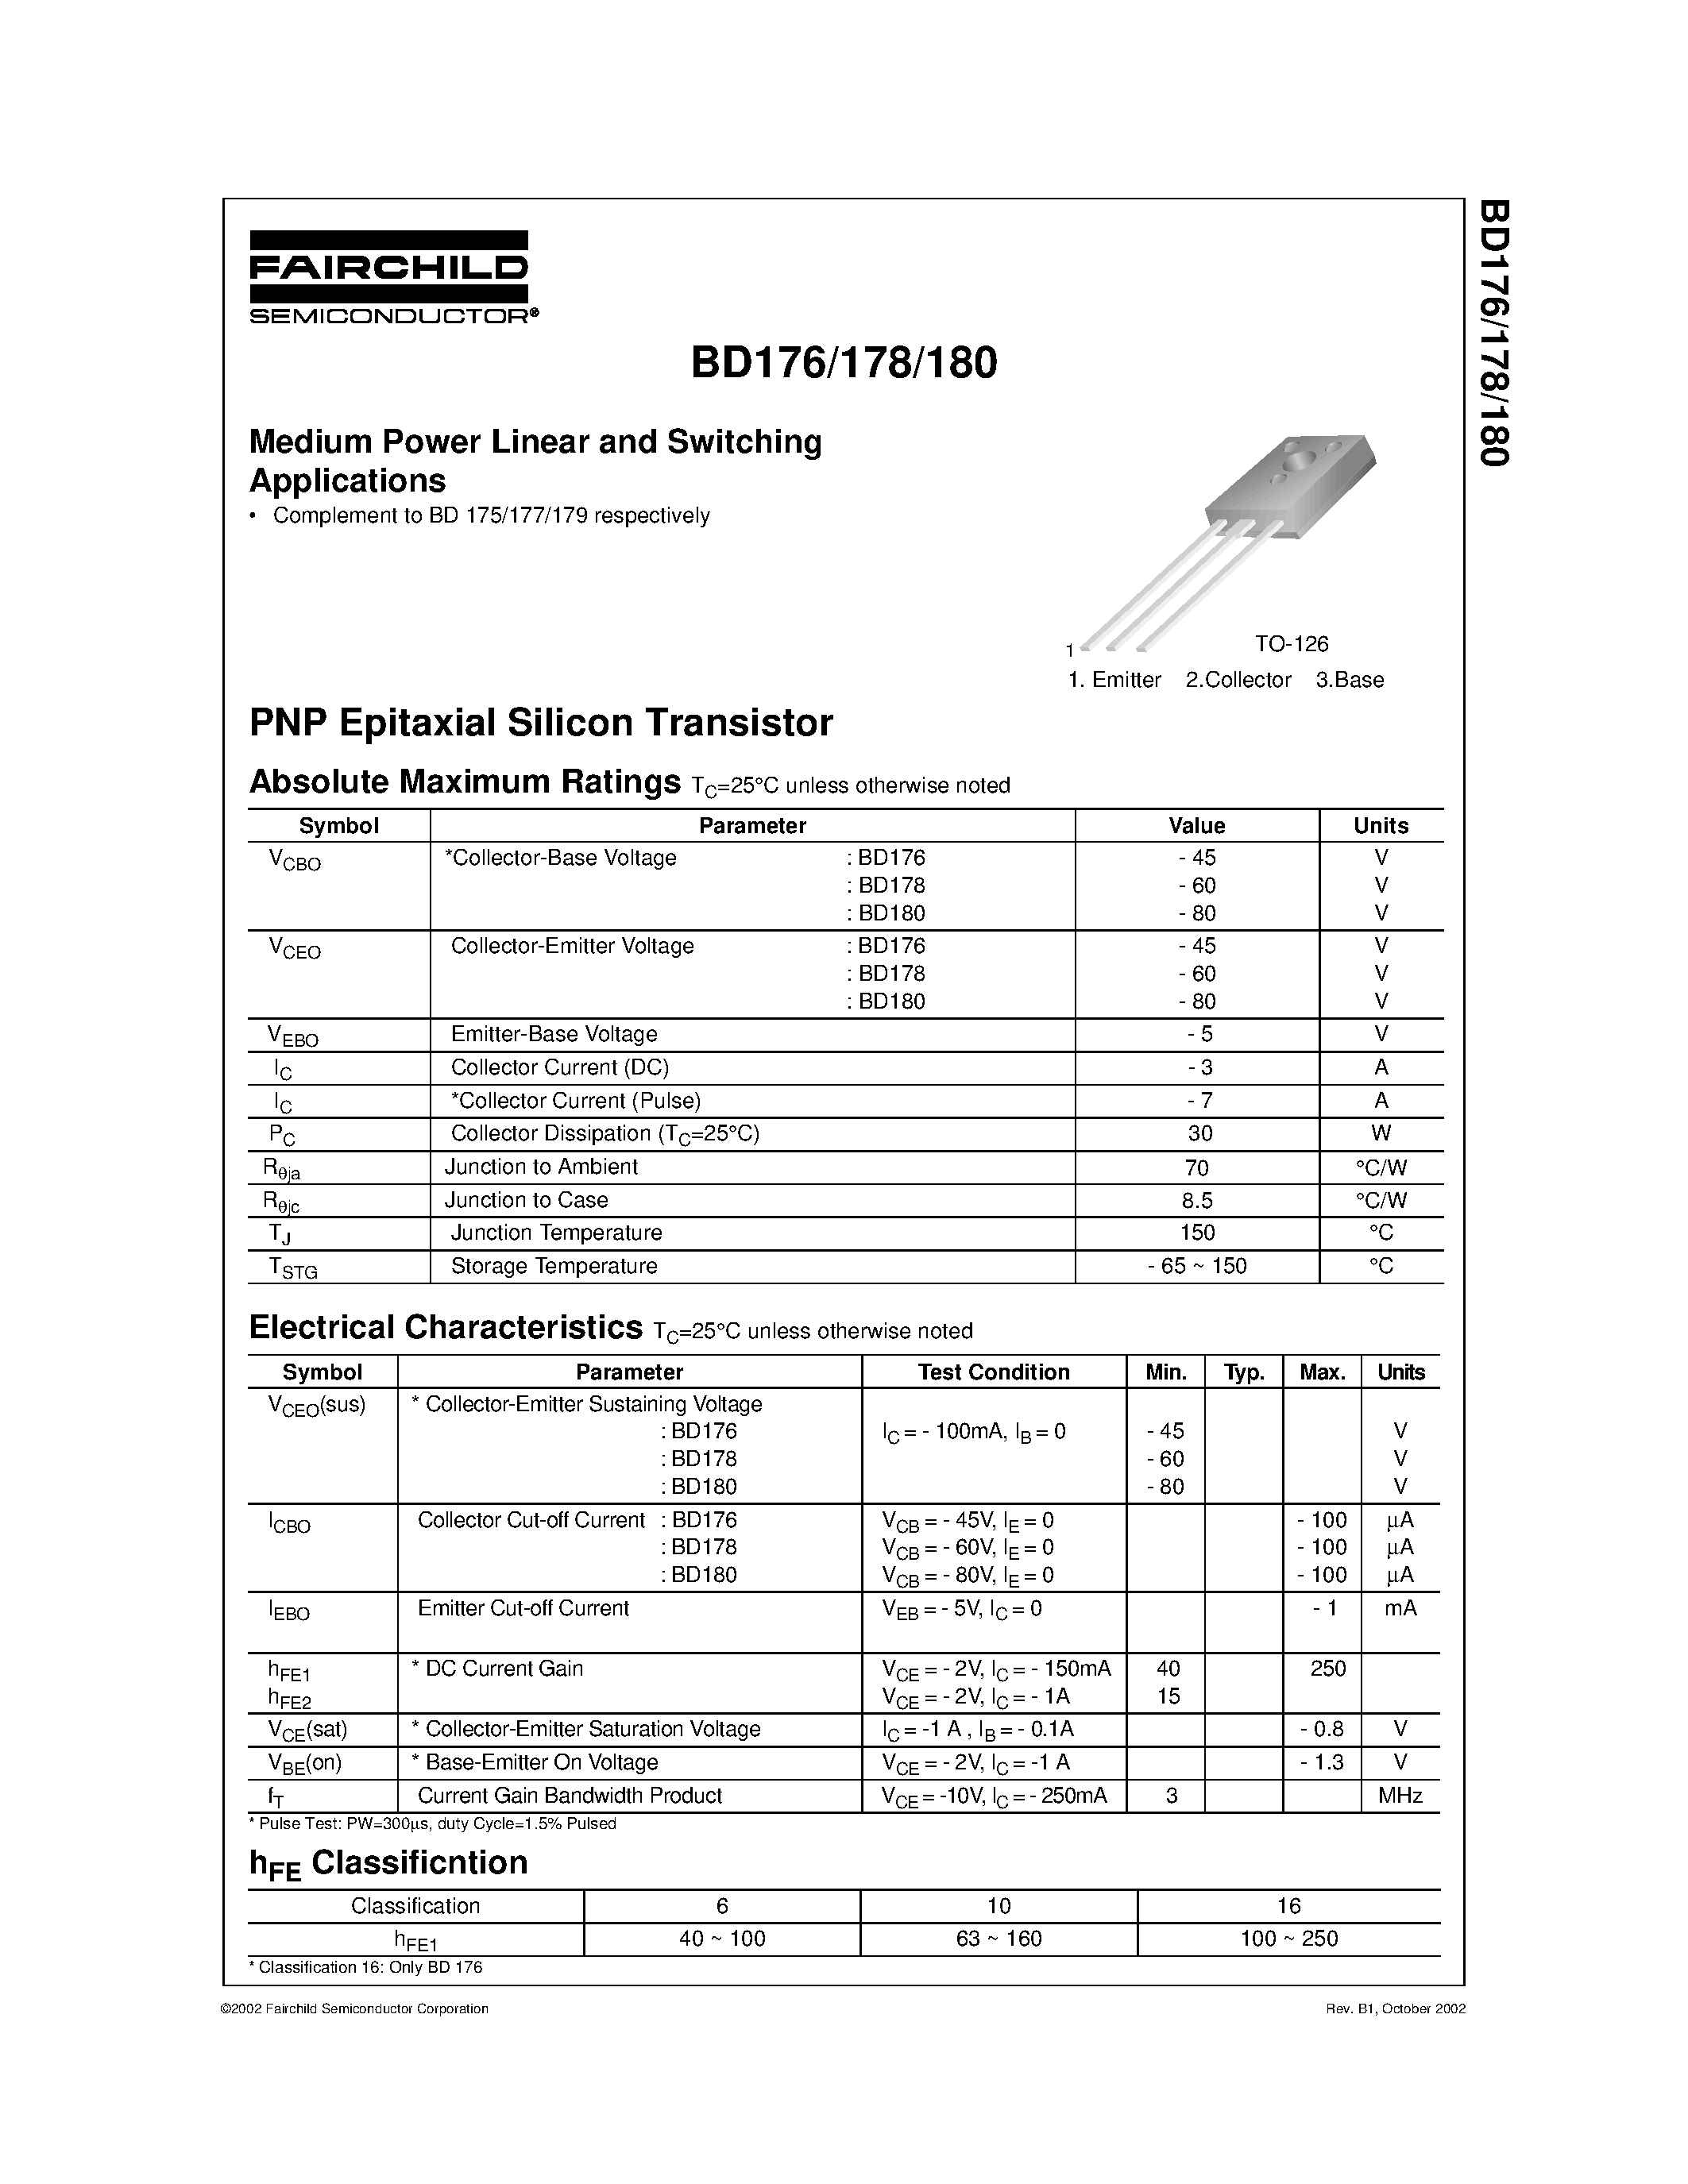 Datasheet BD178 - Medium Power Linear and Switching Applications page 1